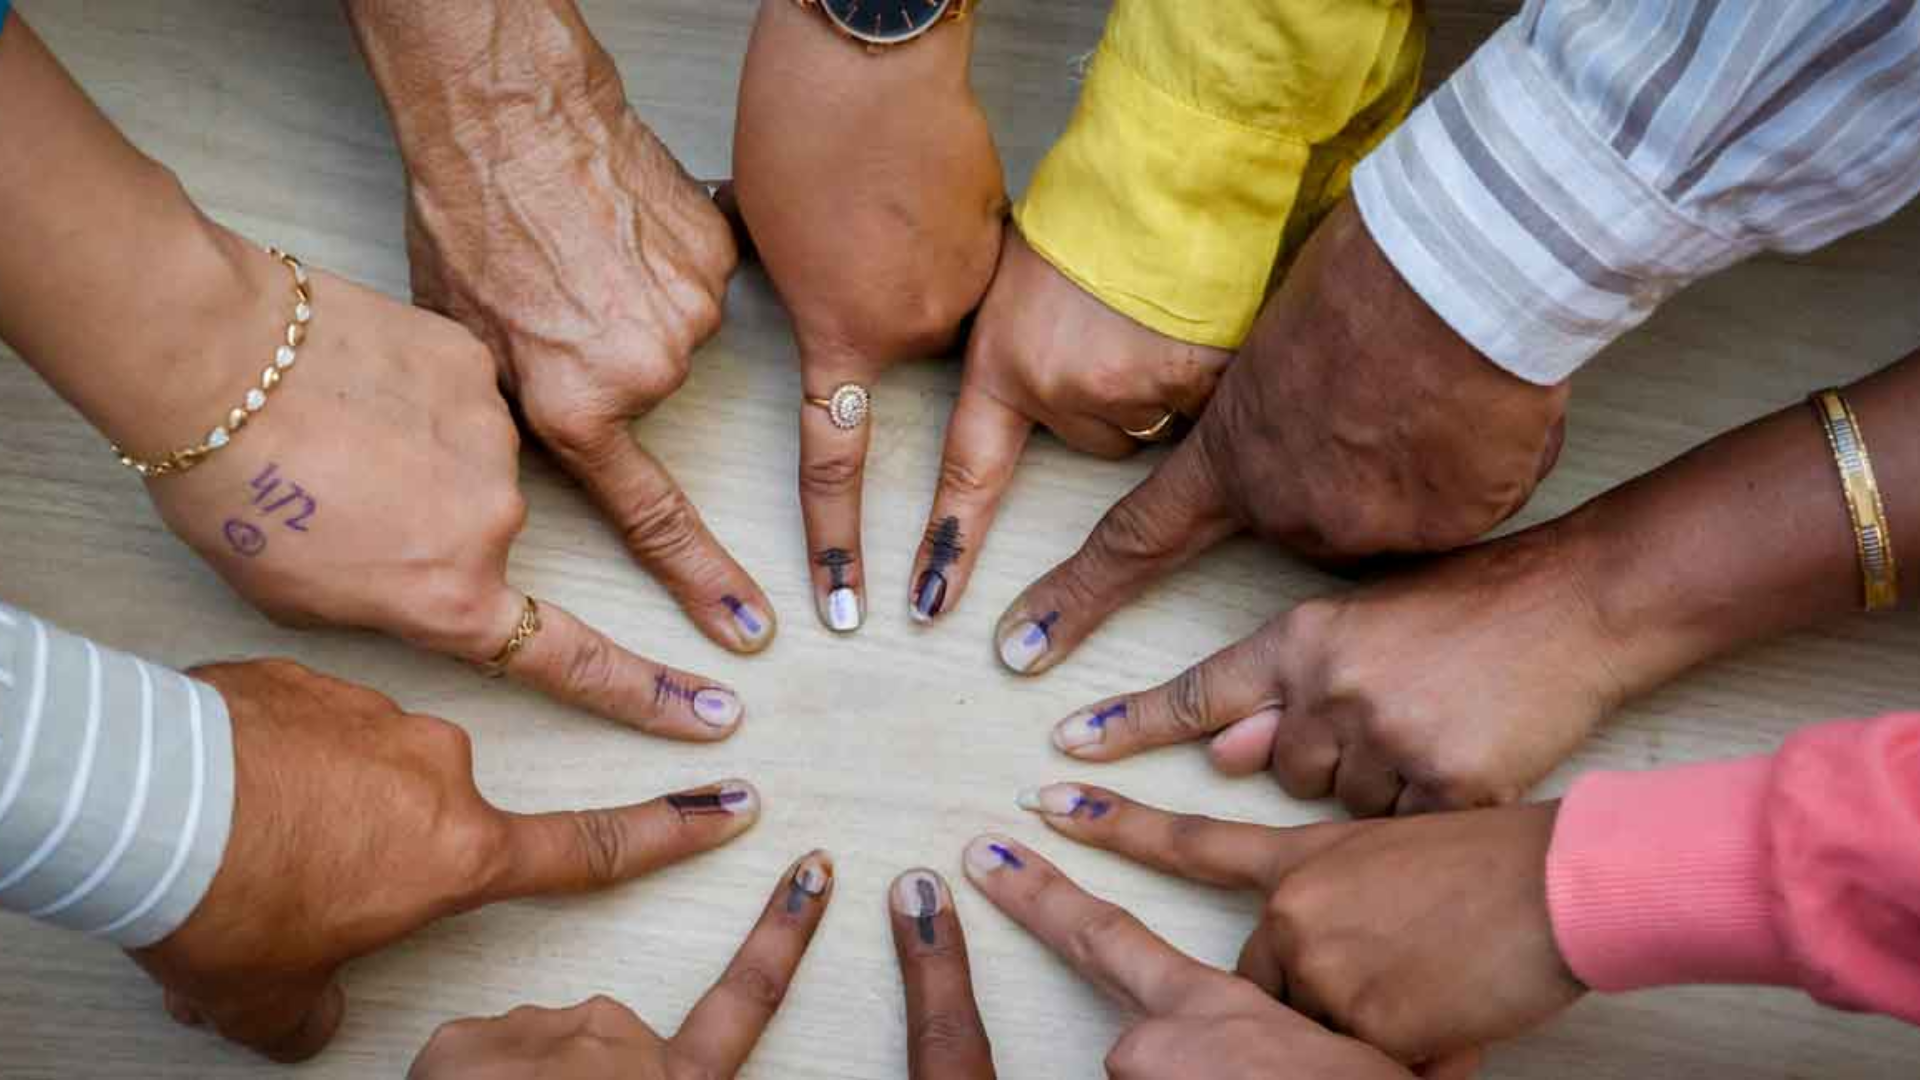 Data Reveals Kerala Adds Over 300,000 Young Voters To Electoral Roll